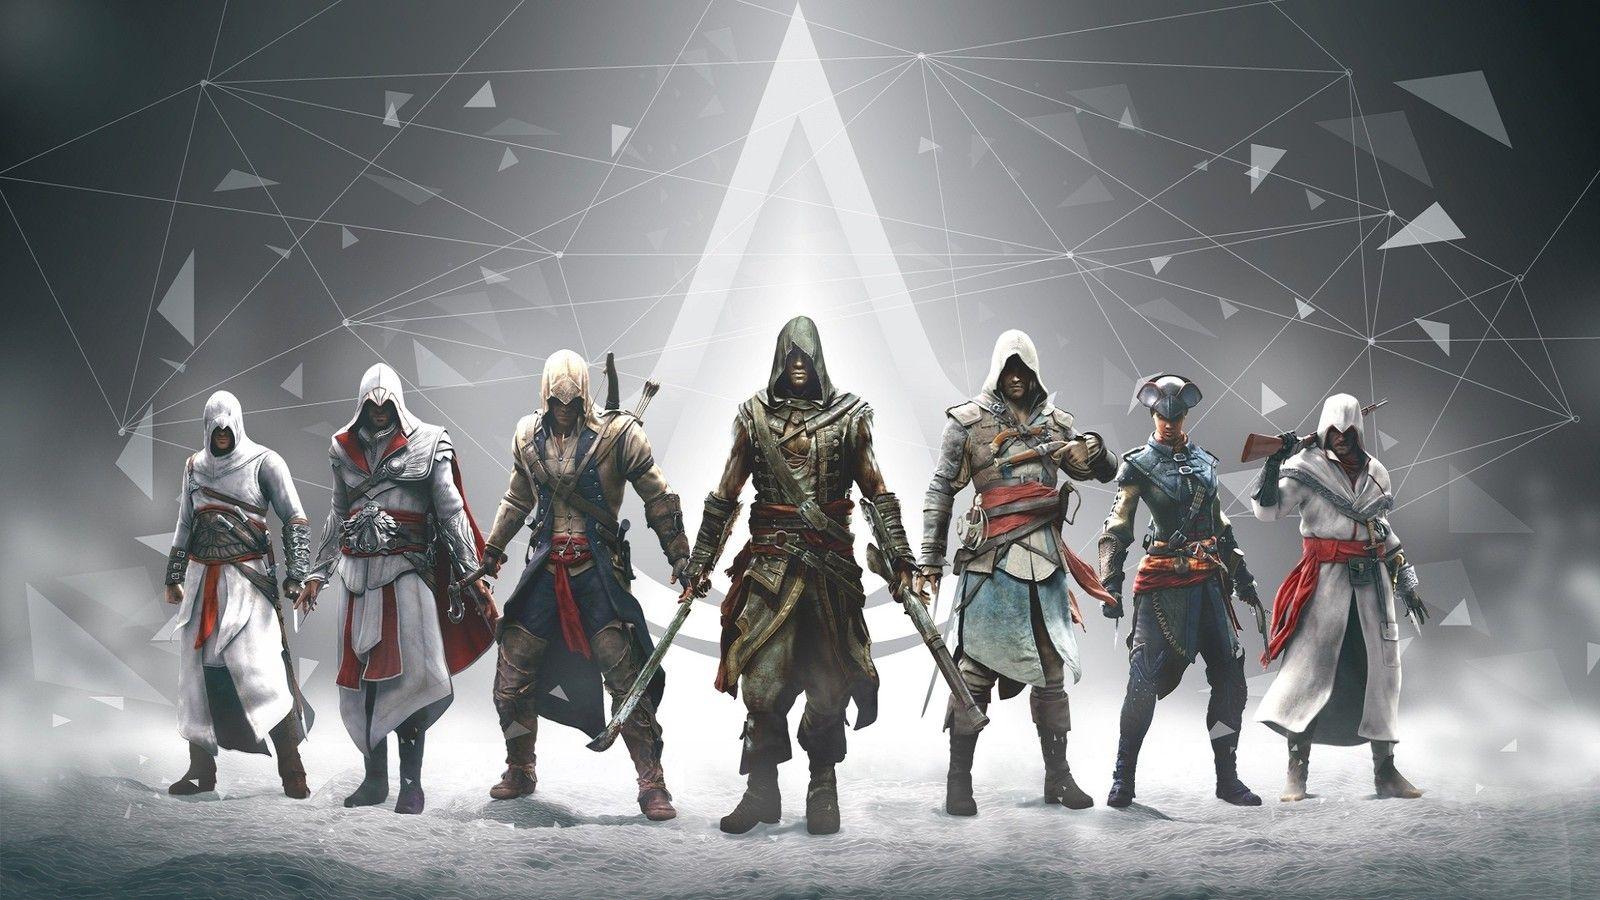 Assassin's Creed wallpaper, Video Game, HQ Assassin's Creed